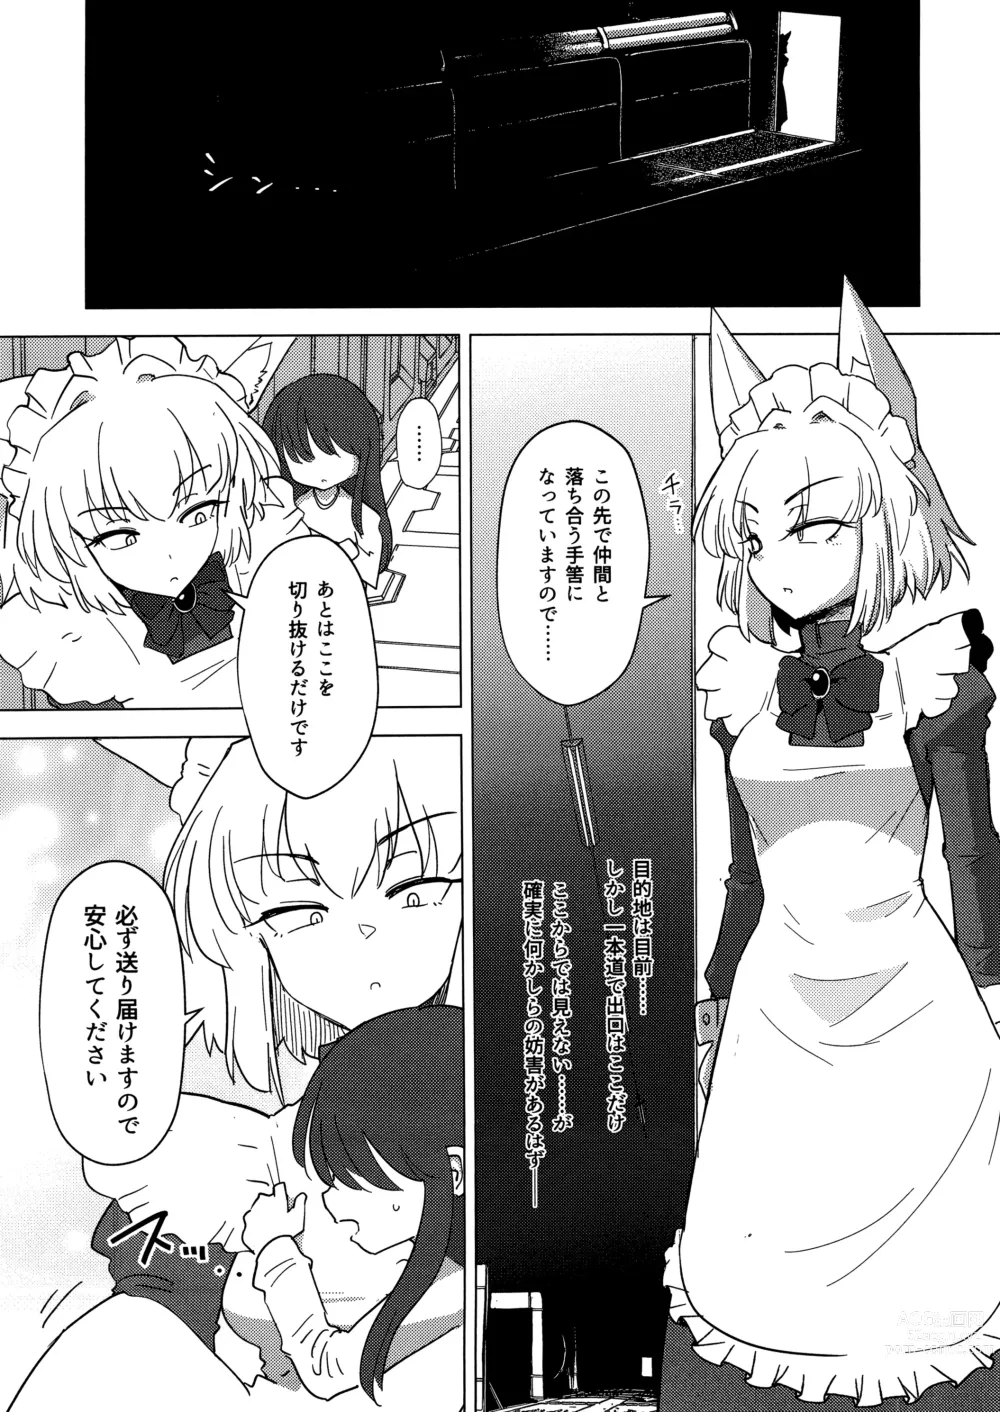 Page 4 of doujinshi Wolf in sheeps clothing in Tentacles